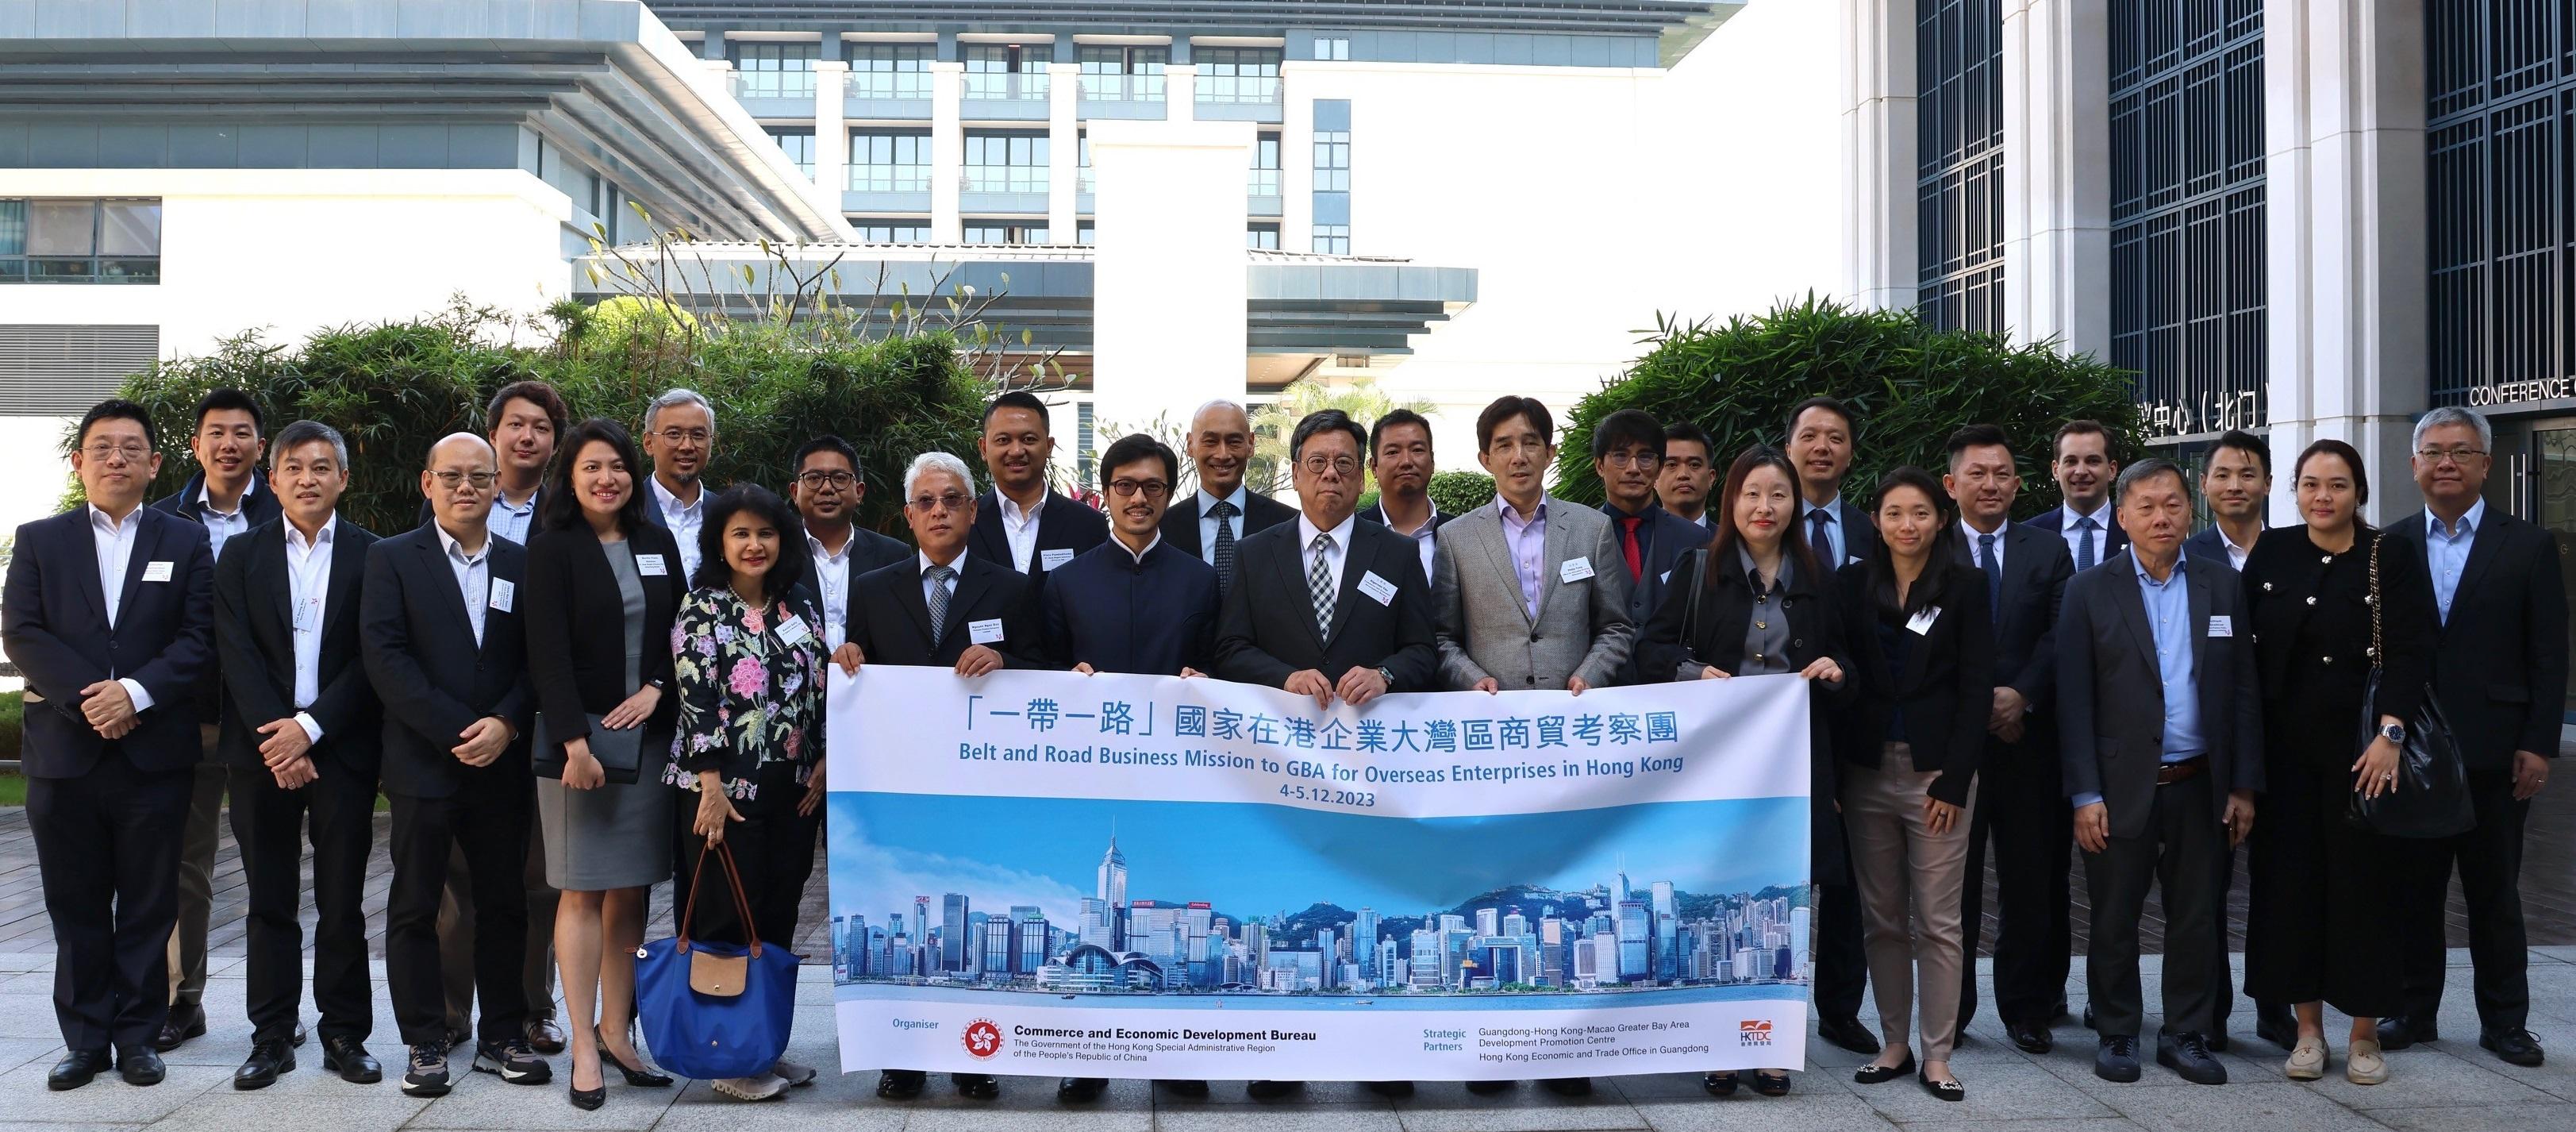 Led by the Secretary for Commerce and Economic Development, Mr Algernon Yau, a business delegation of enterprises of Belt and Road countries operating in Hong Kong today (December 4) began in Shenzhen a two-day visit to the Guangdong-Hong Kong-Macao Greater Bay Area. Photo shows Mr Yau (front row, sixth right); the Commissioner for Belt and Road, Mr Nicholas Ho (front row, seventh right); the Director-General of the Office for Attracting Strategic Enterprises, Mr Philip Yung (front row, fifth right); and the Director of the Hong Kong Economic and Trade Office in Guangdong, Miss Linda So (front row, fourth right), with the delegates.